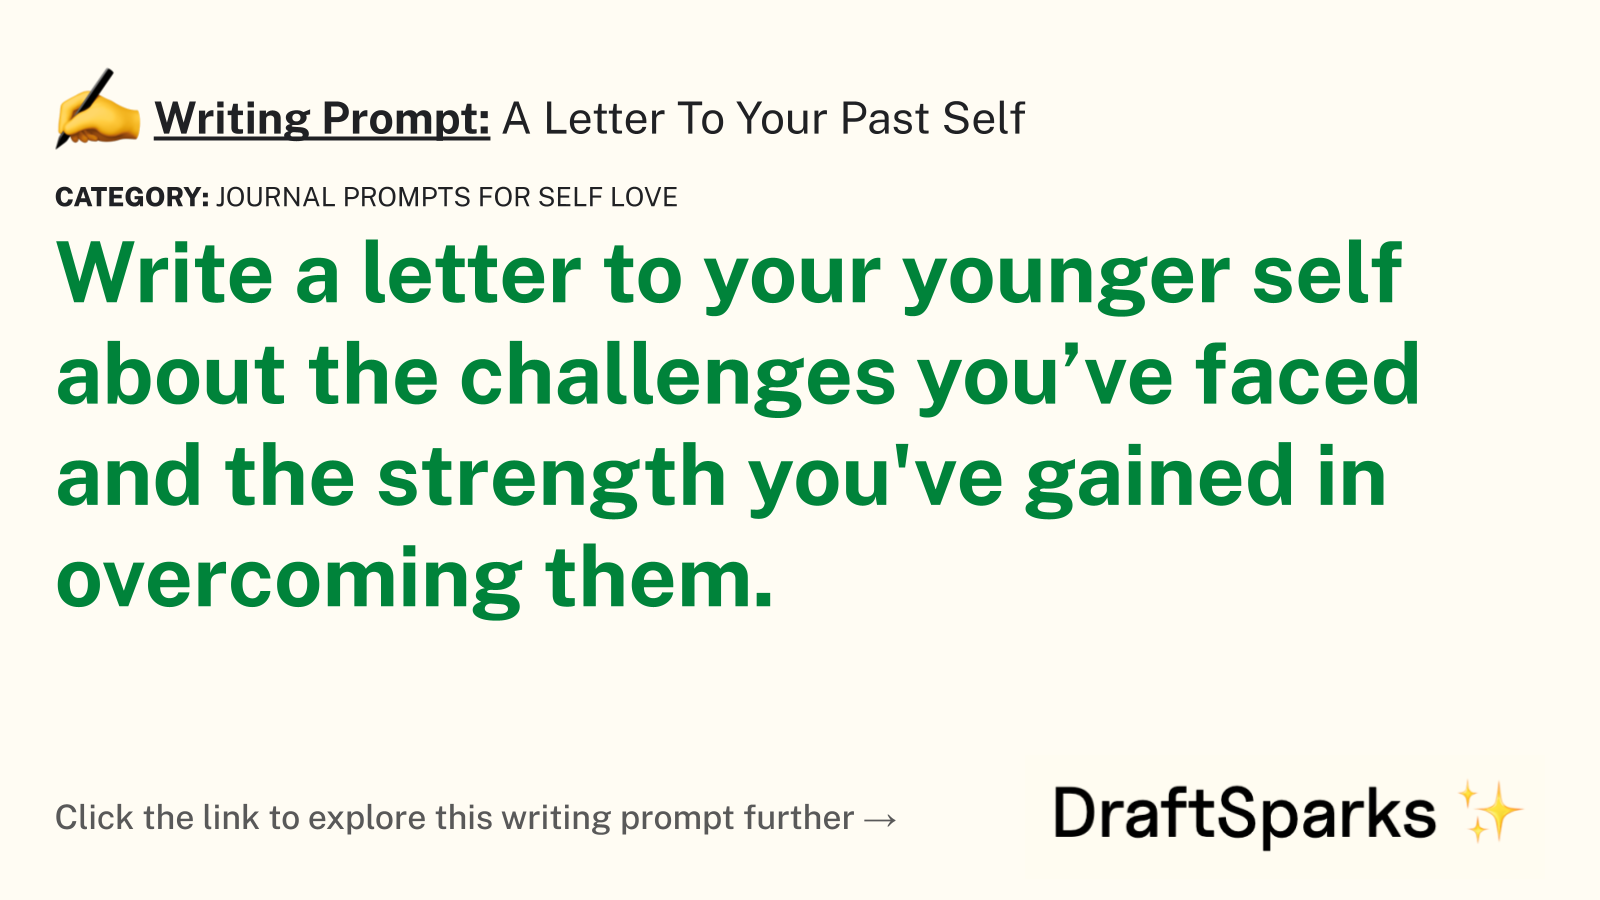 A Letter To Your Past Self